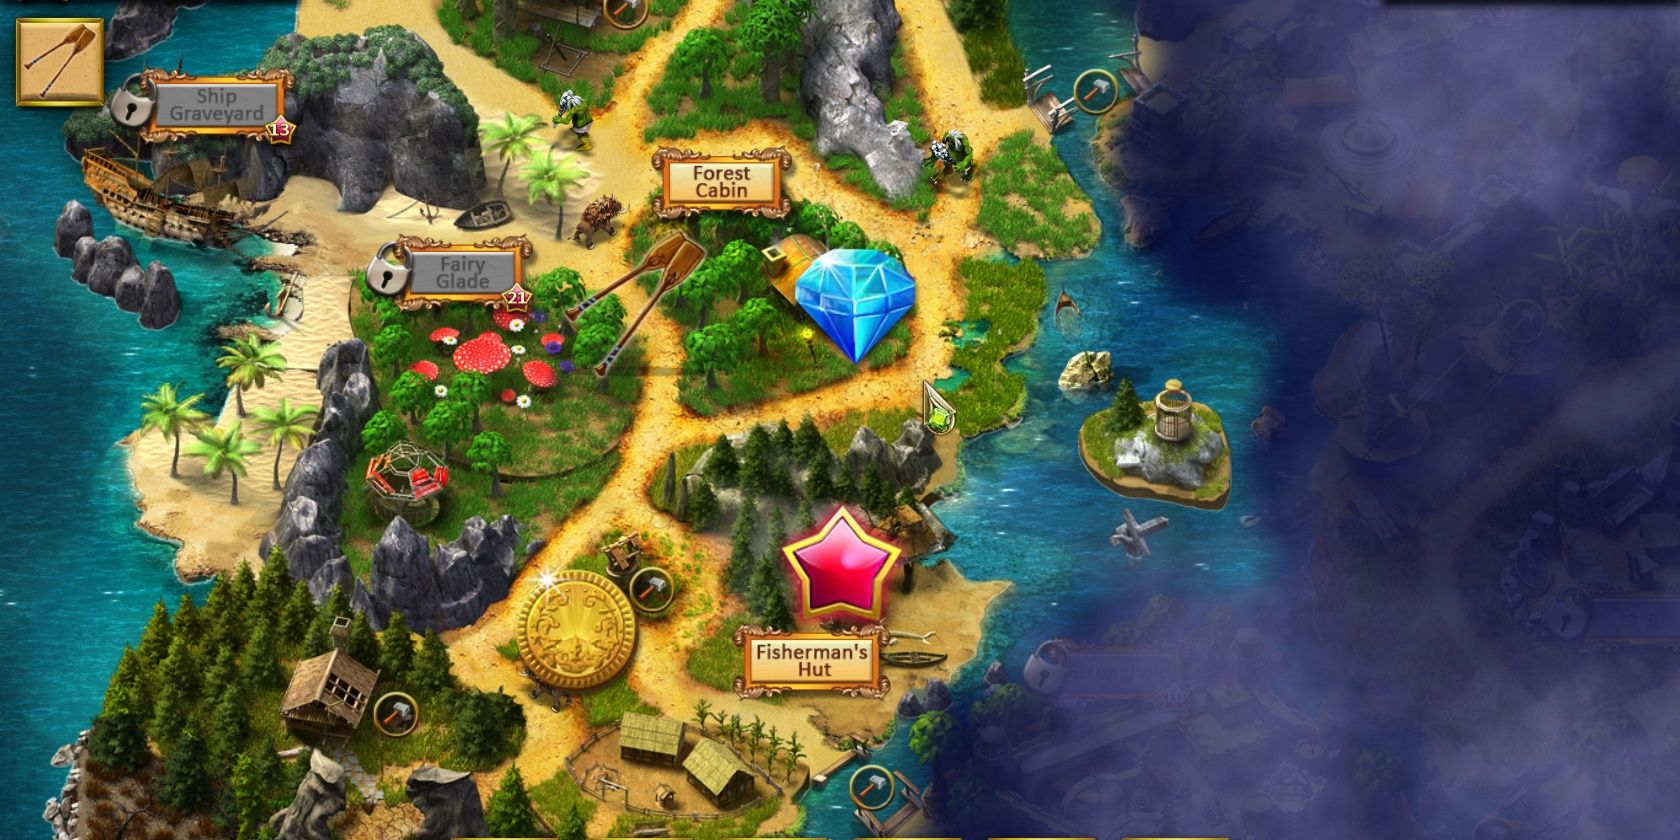 The main map of Lost Lands: A Hidden Object Adventure